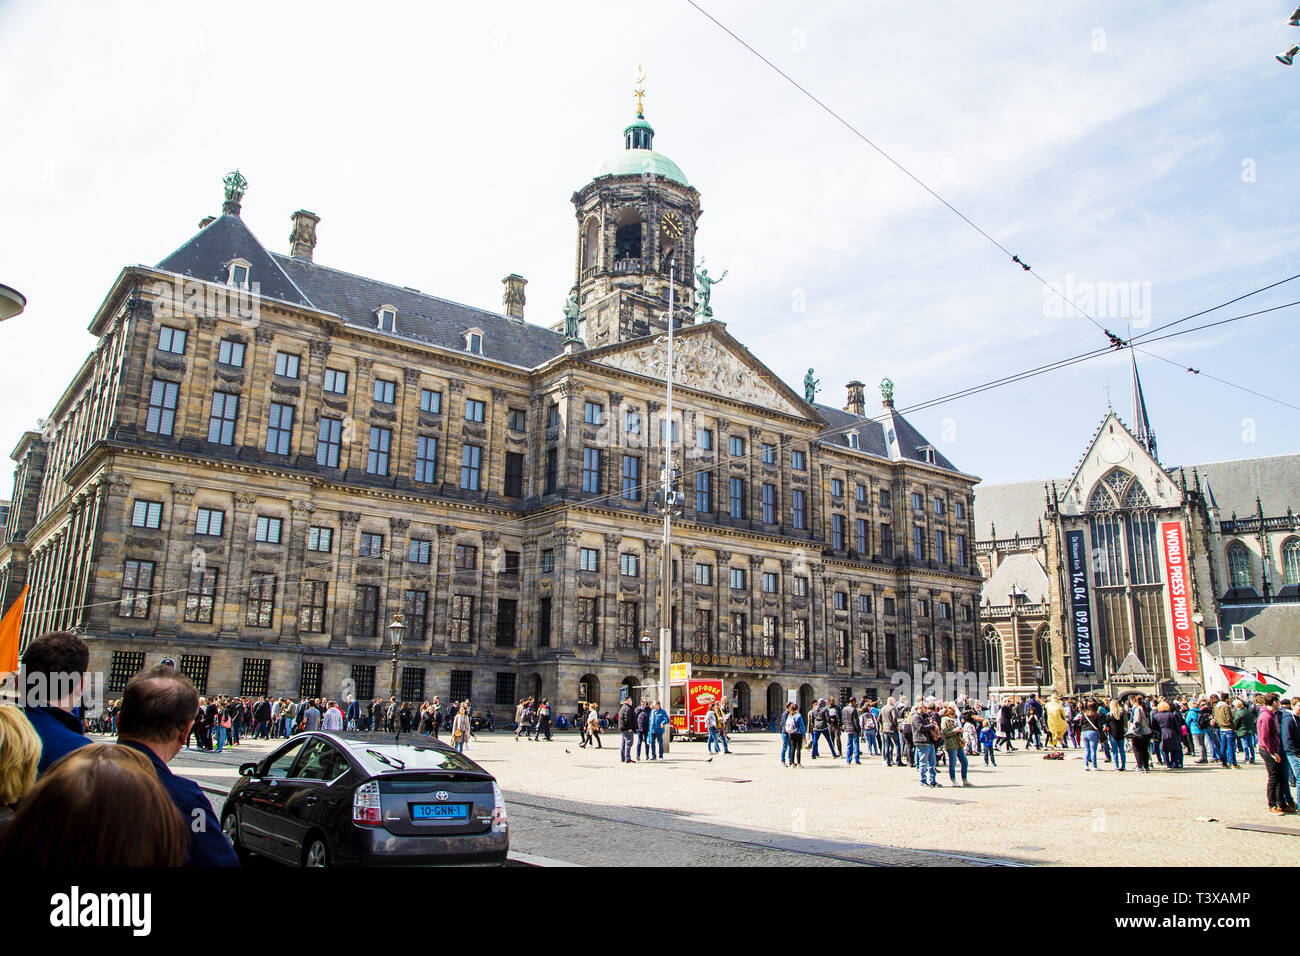 The Old Palace, Dam Square, Amsterdam, Netherlands. people go about their day in the main square. Stock Photo